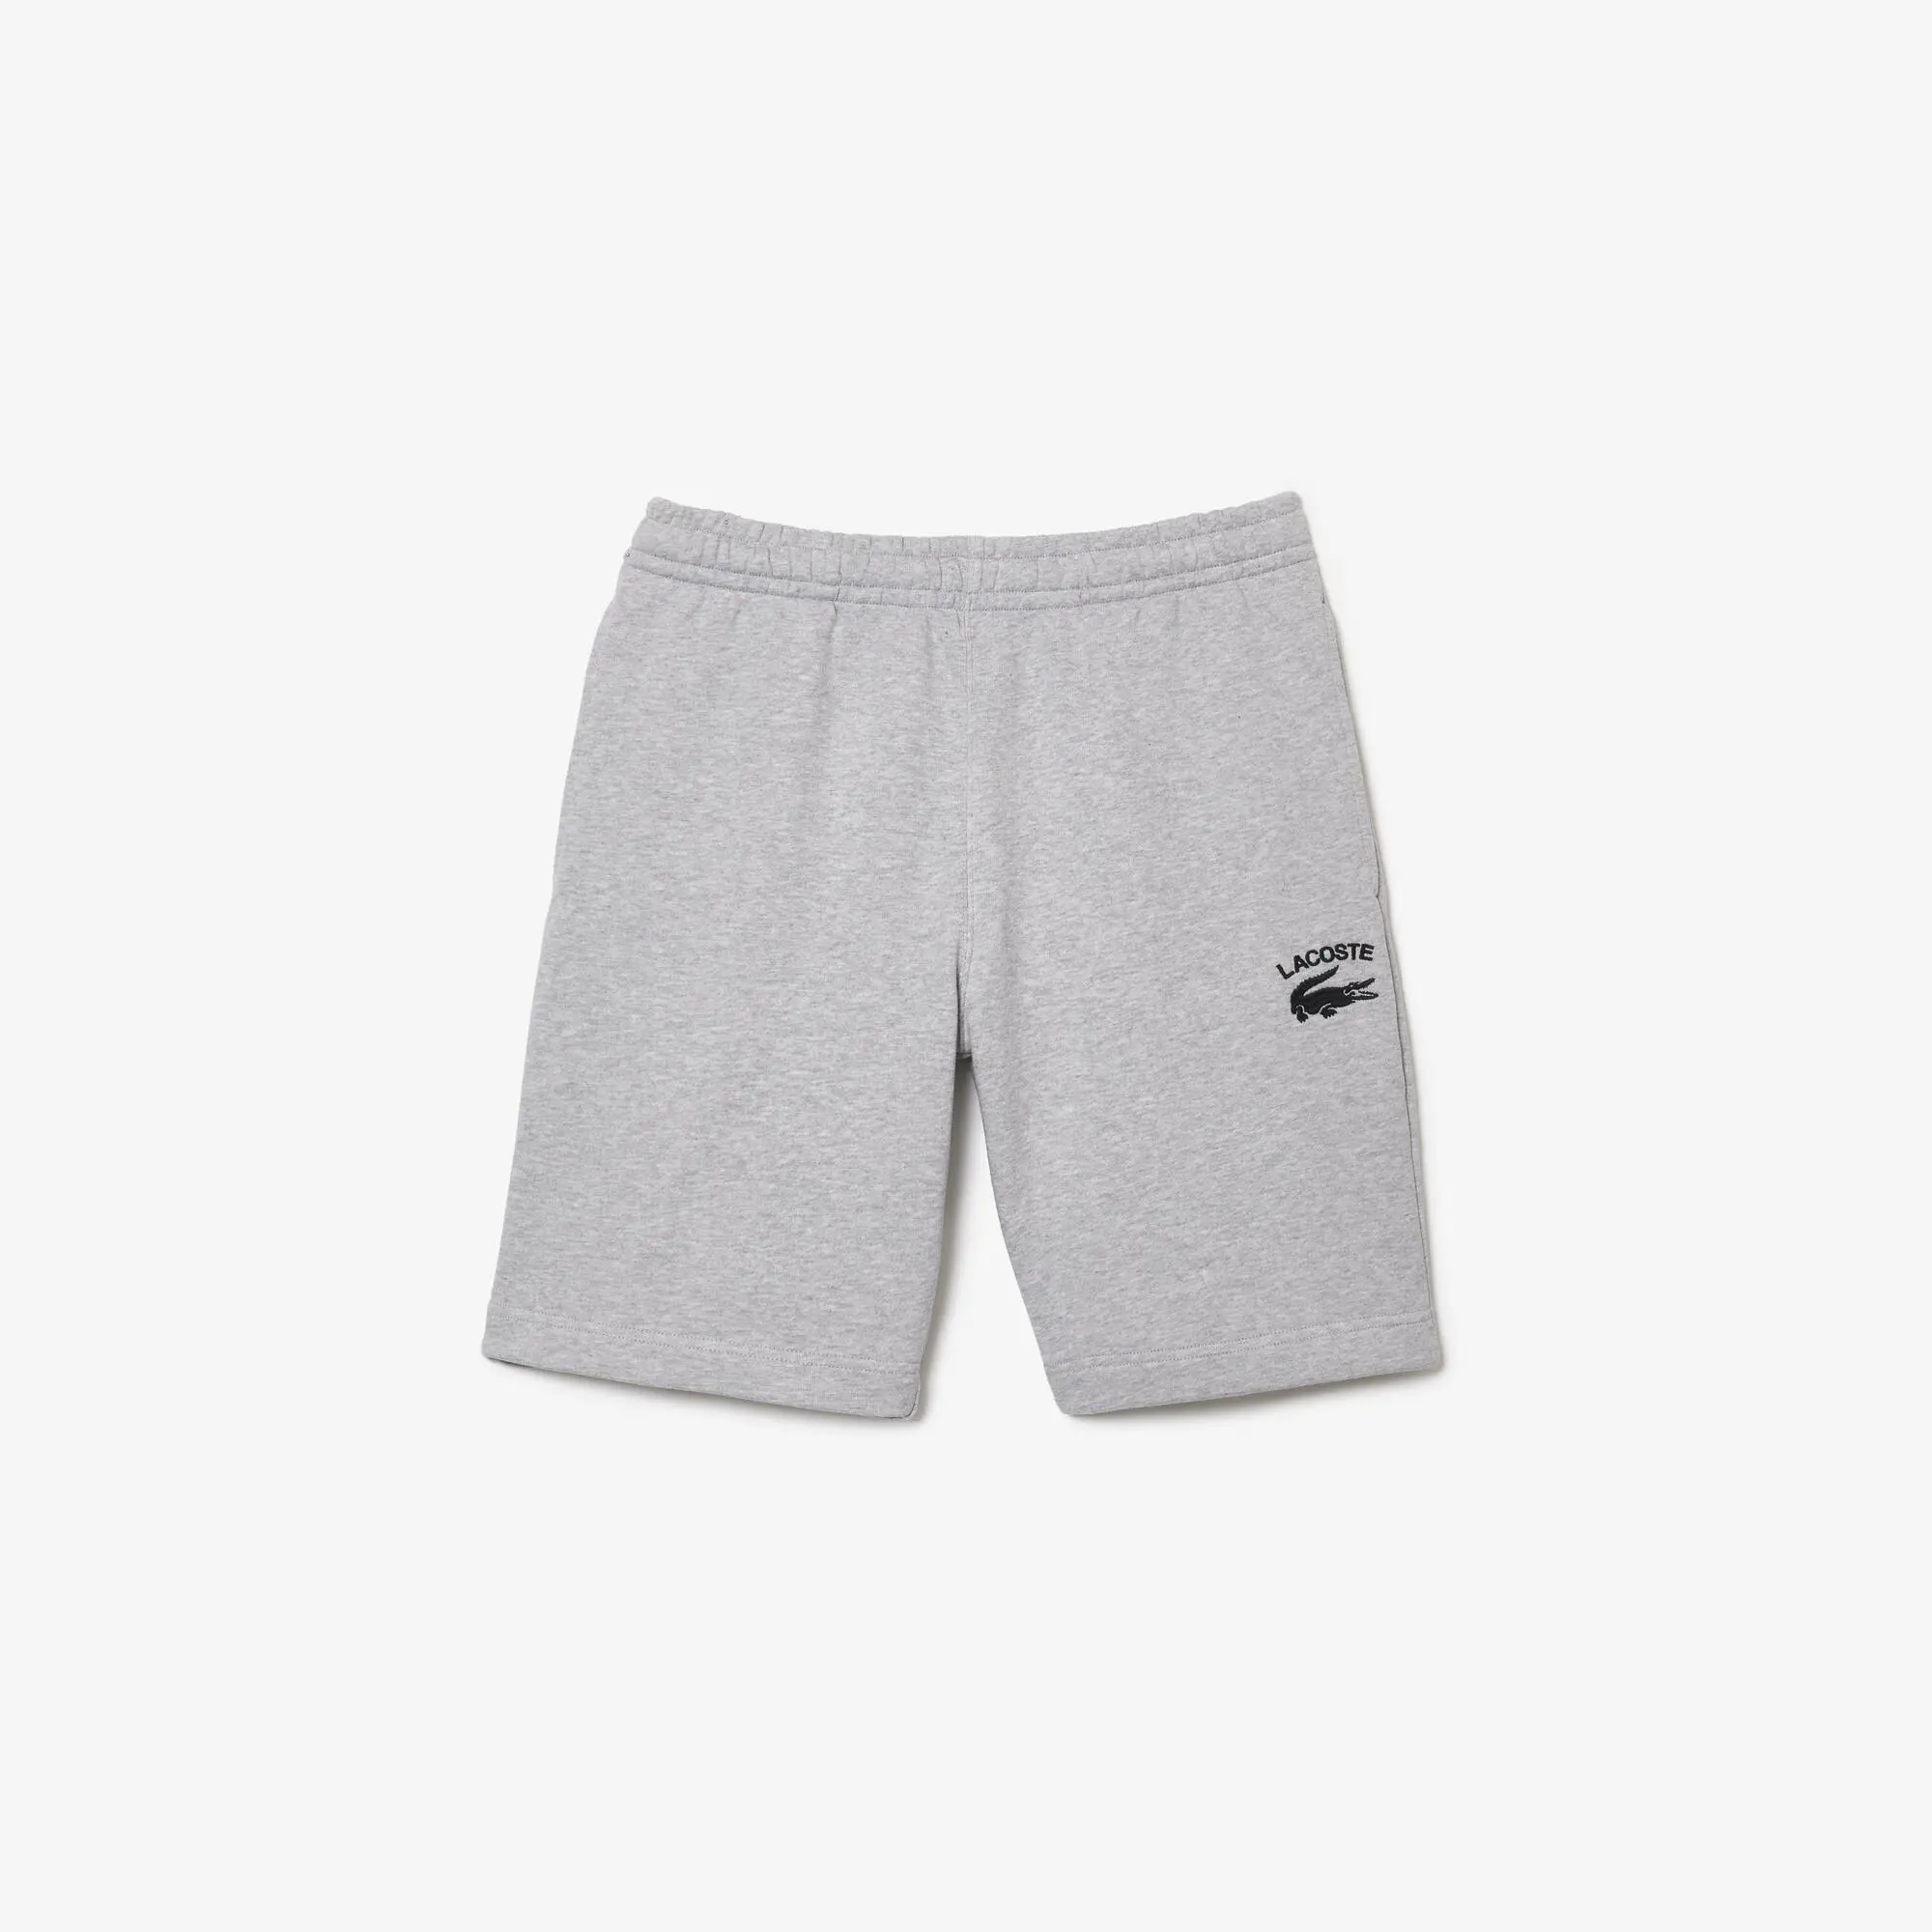 Lacoste Men's Lacoste Embroidery Shorts. 2